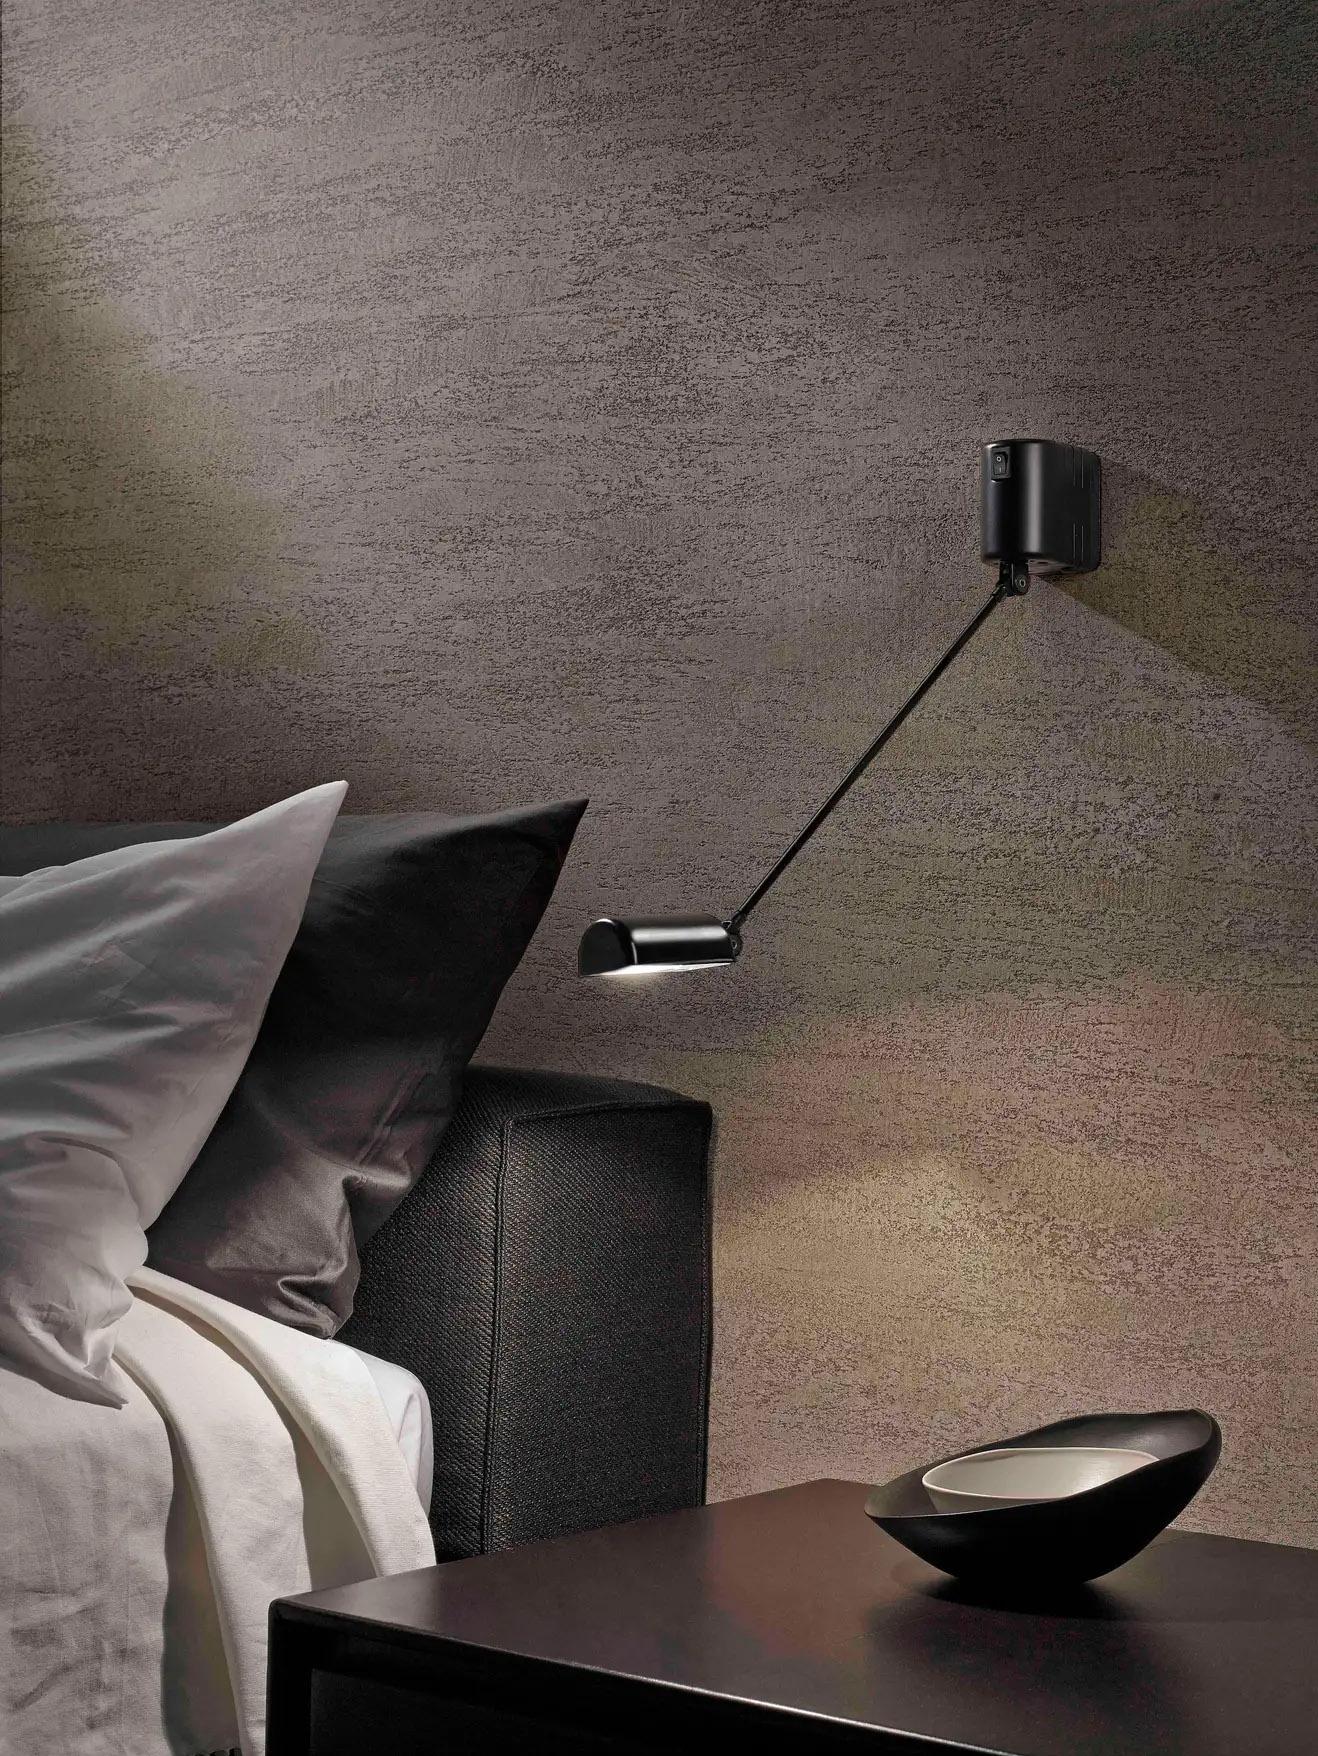 Lumina Daphine Parete LED wall lamp by Tommaso Cimini

The wall version, with its minimalist aesthetic, has a single arm that can be rotated through 180° horizontally and 90° vertically, till fully up against the wall. Of the Daphine, it retains